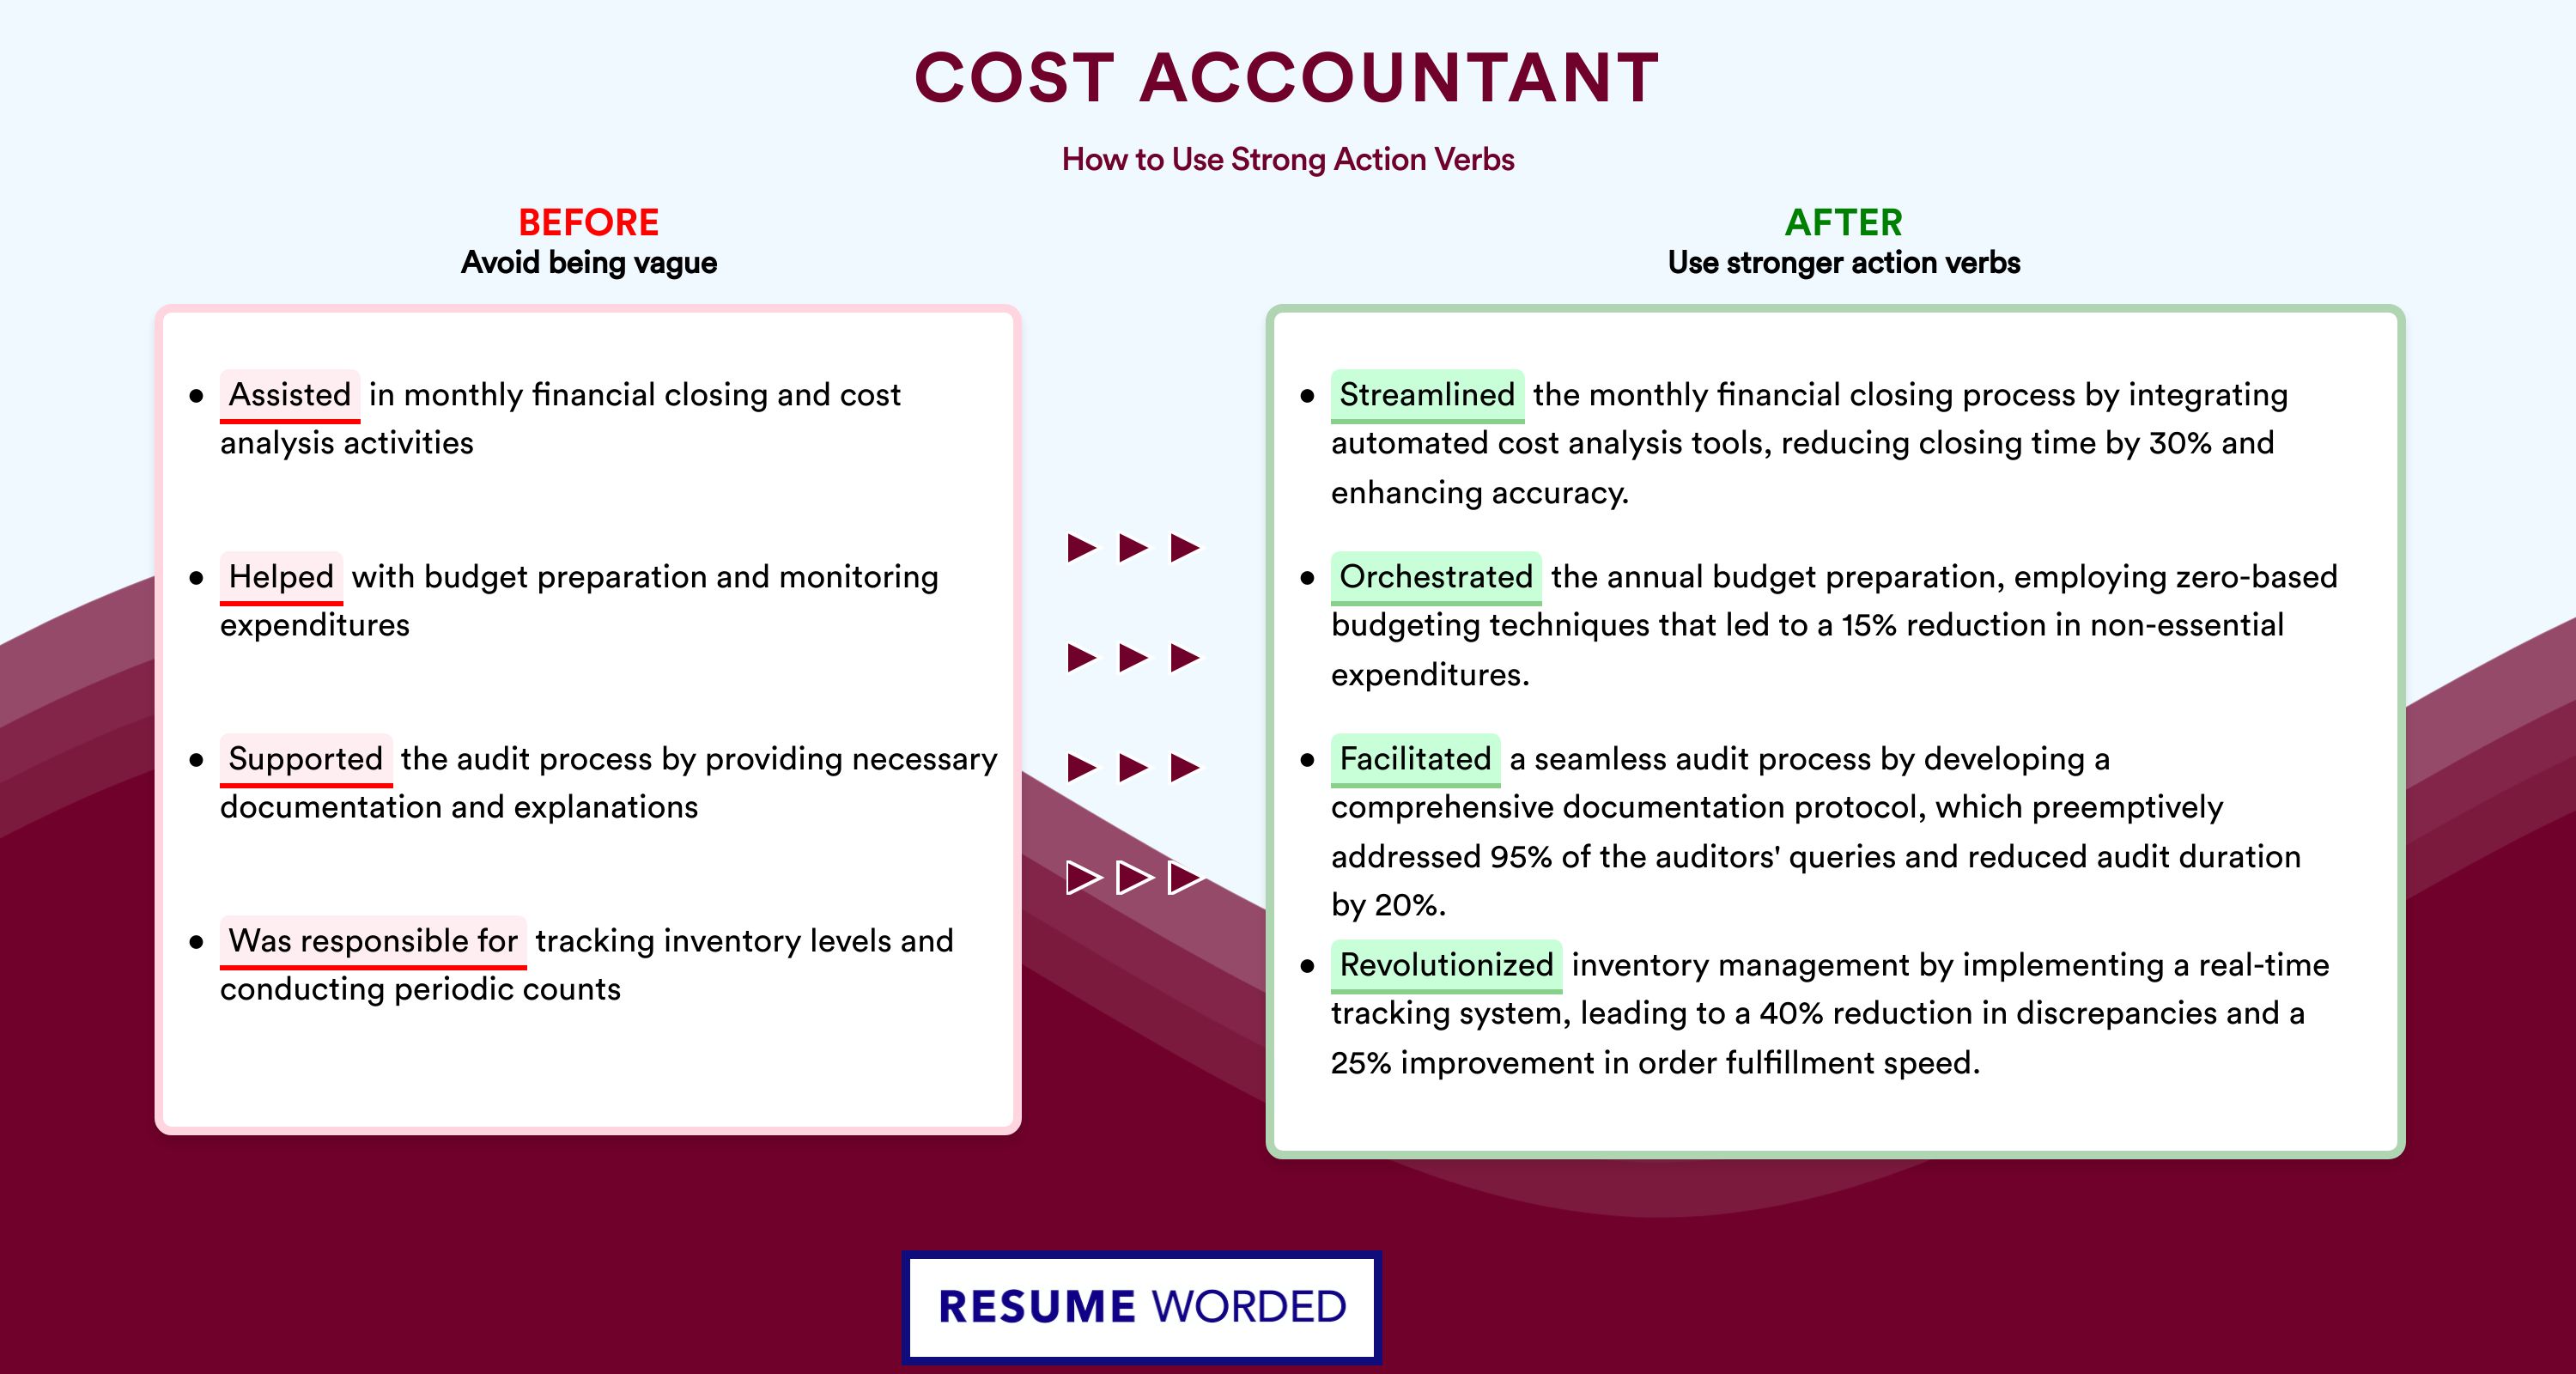 Action Verbs for Cost Accountant